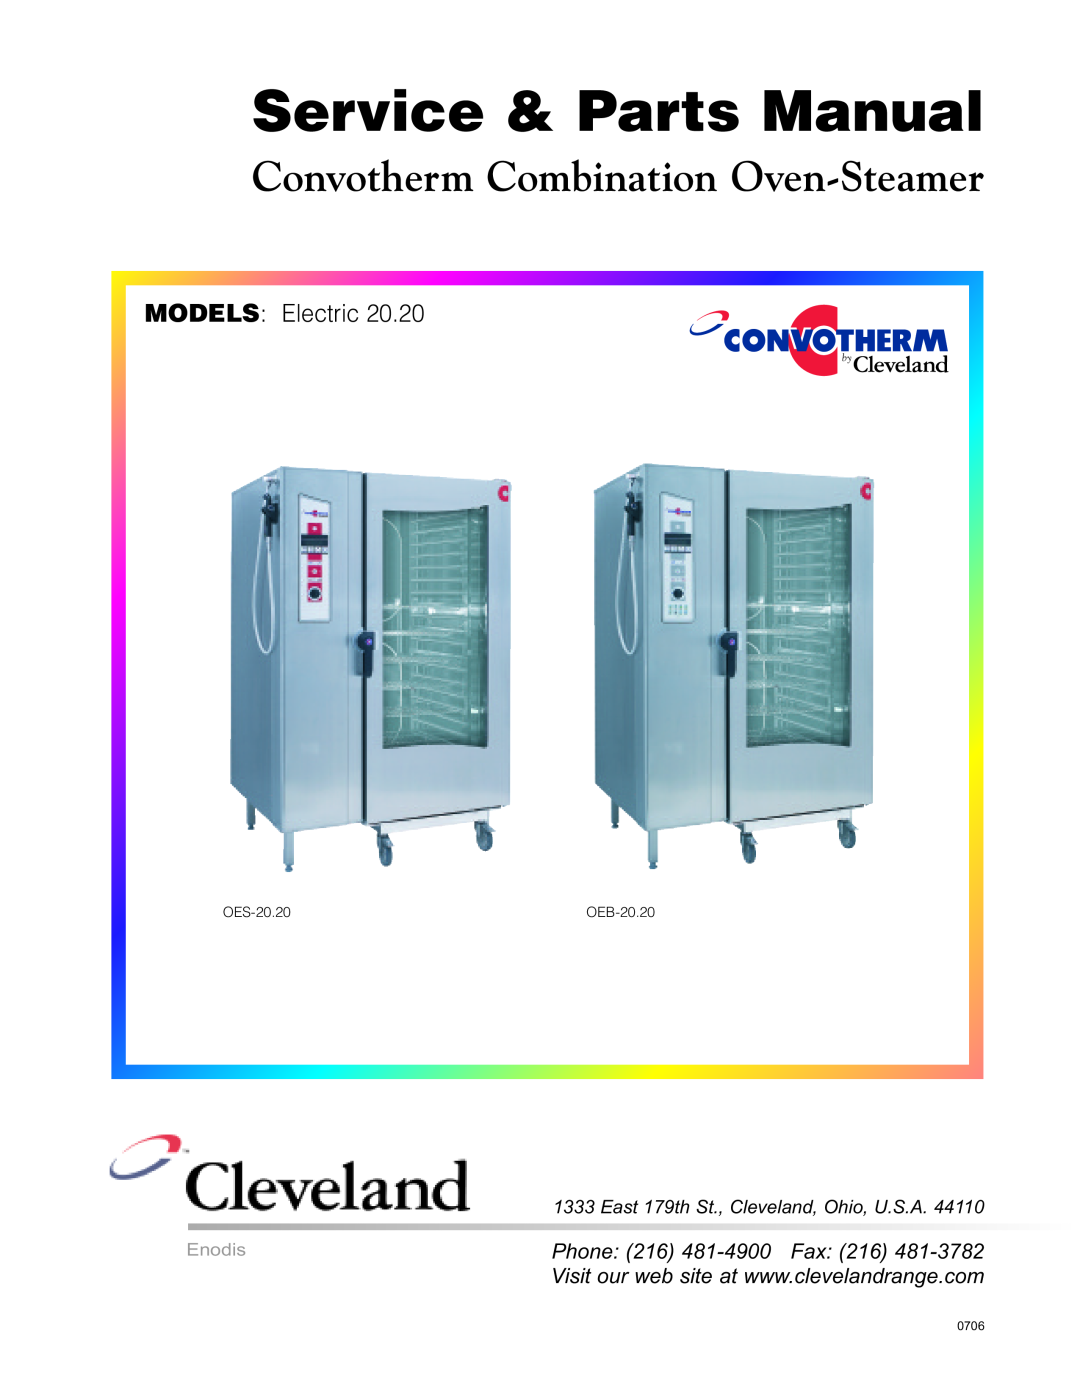 Cleveland Range OEB-20.20 specifications Cleveland, Combi Oven-Steamer, Advanced Closed, System +3, Hot Air, Retherm 